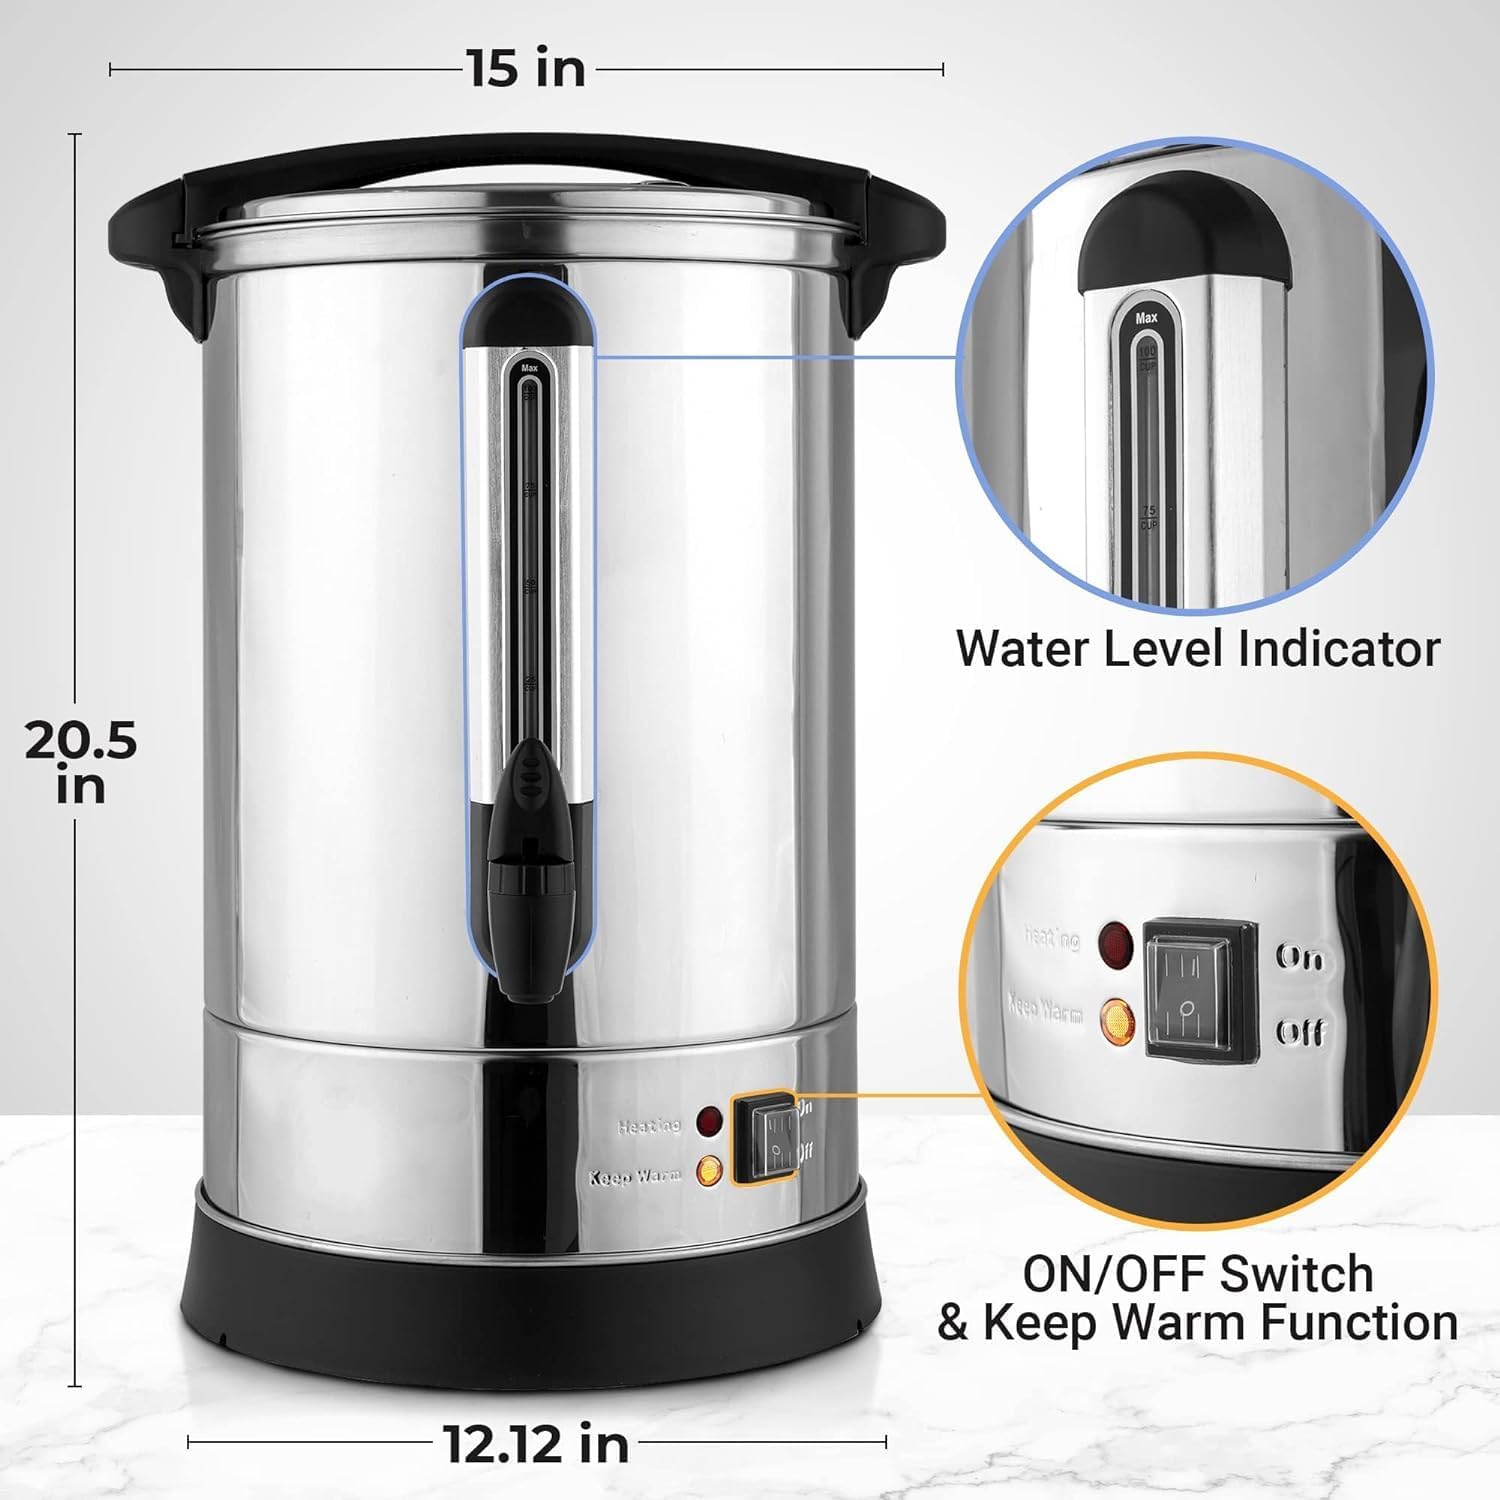 Large Coffee Urn, 100-Cup Coffee Maker with Temperature Control